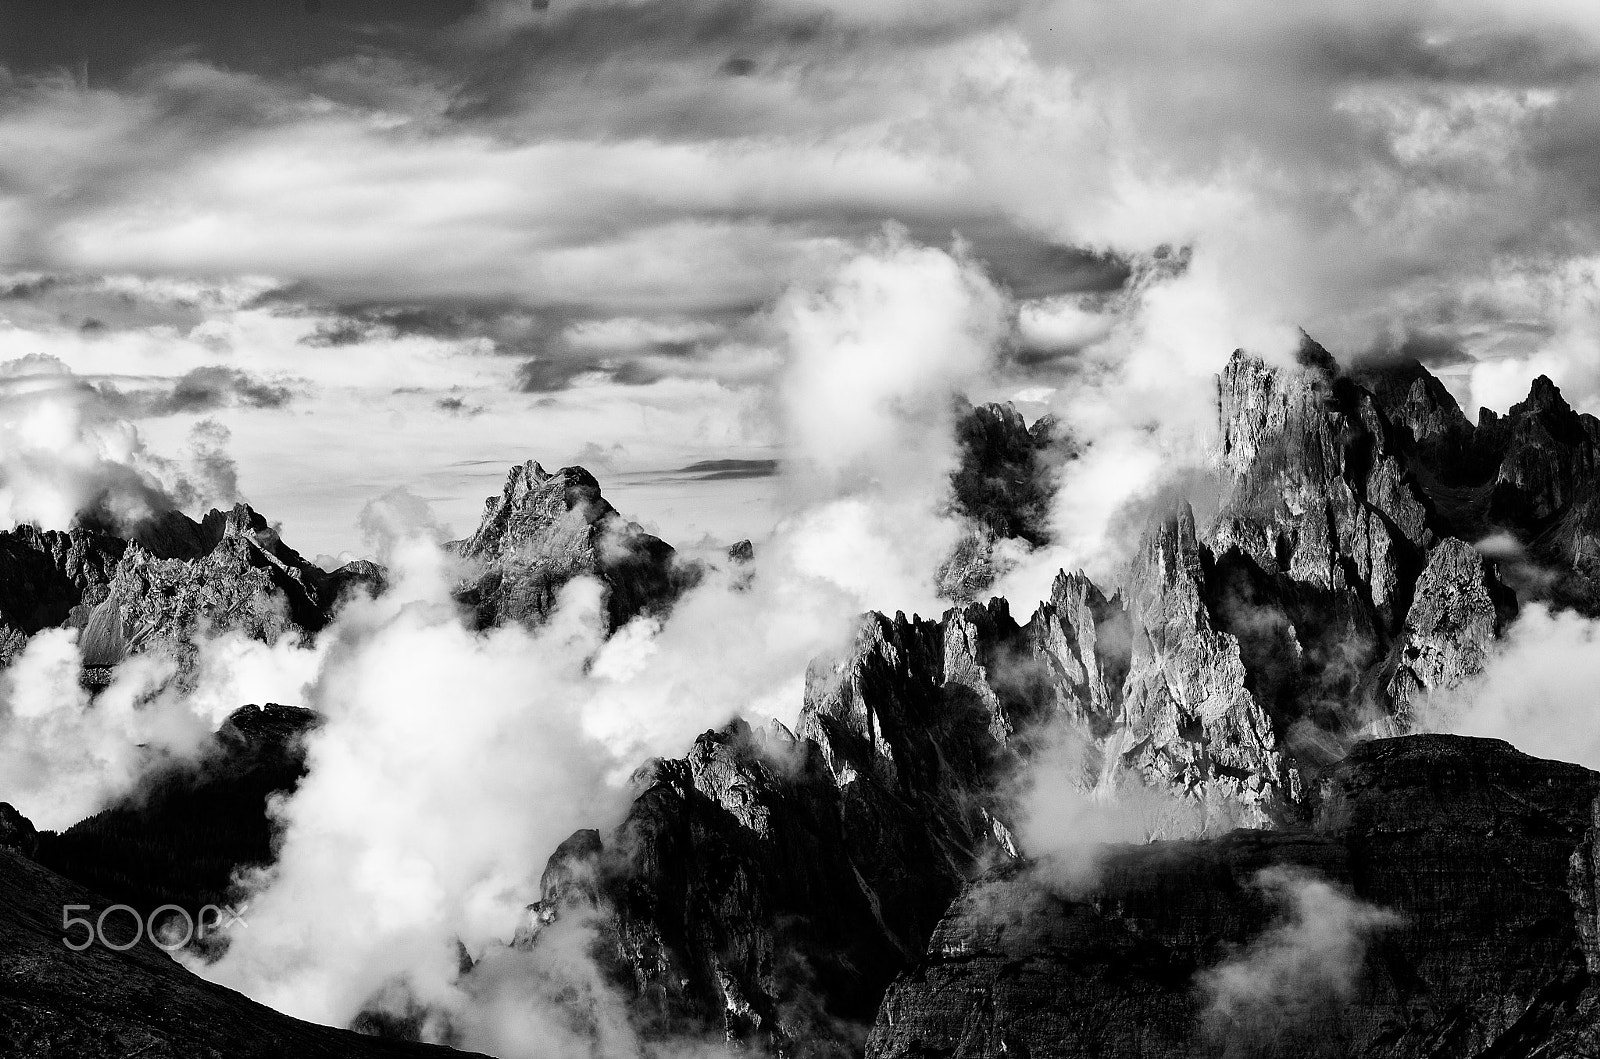 Pentax K-50 + Sigma 17-70mm F2.8-4 DC Macro HSM | C sample photo. Clouds and mountains photography